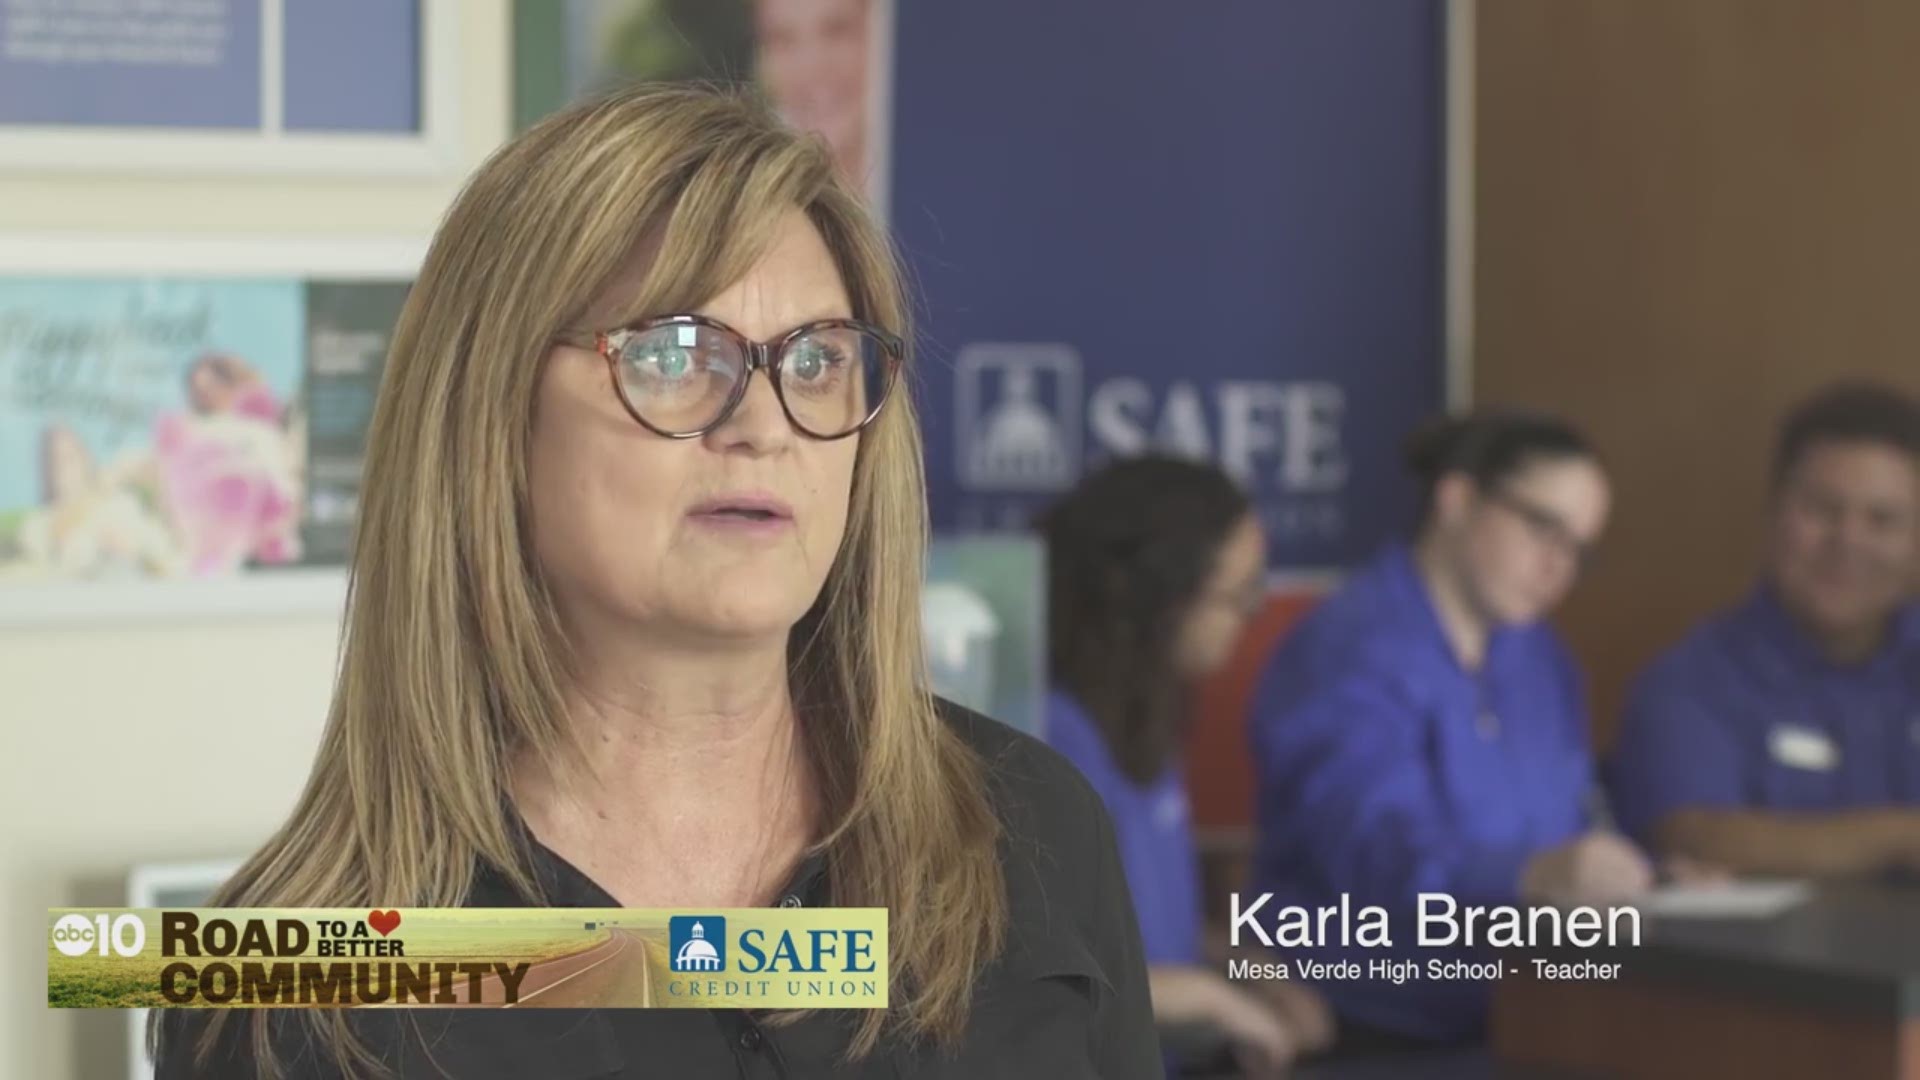 Road to a Better Community is sponsored by SAFE Credit Union.